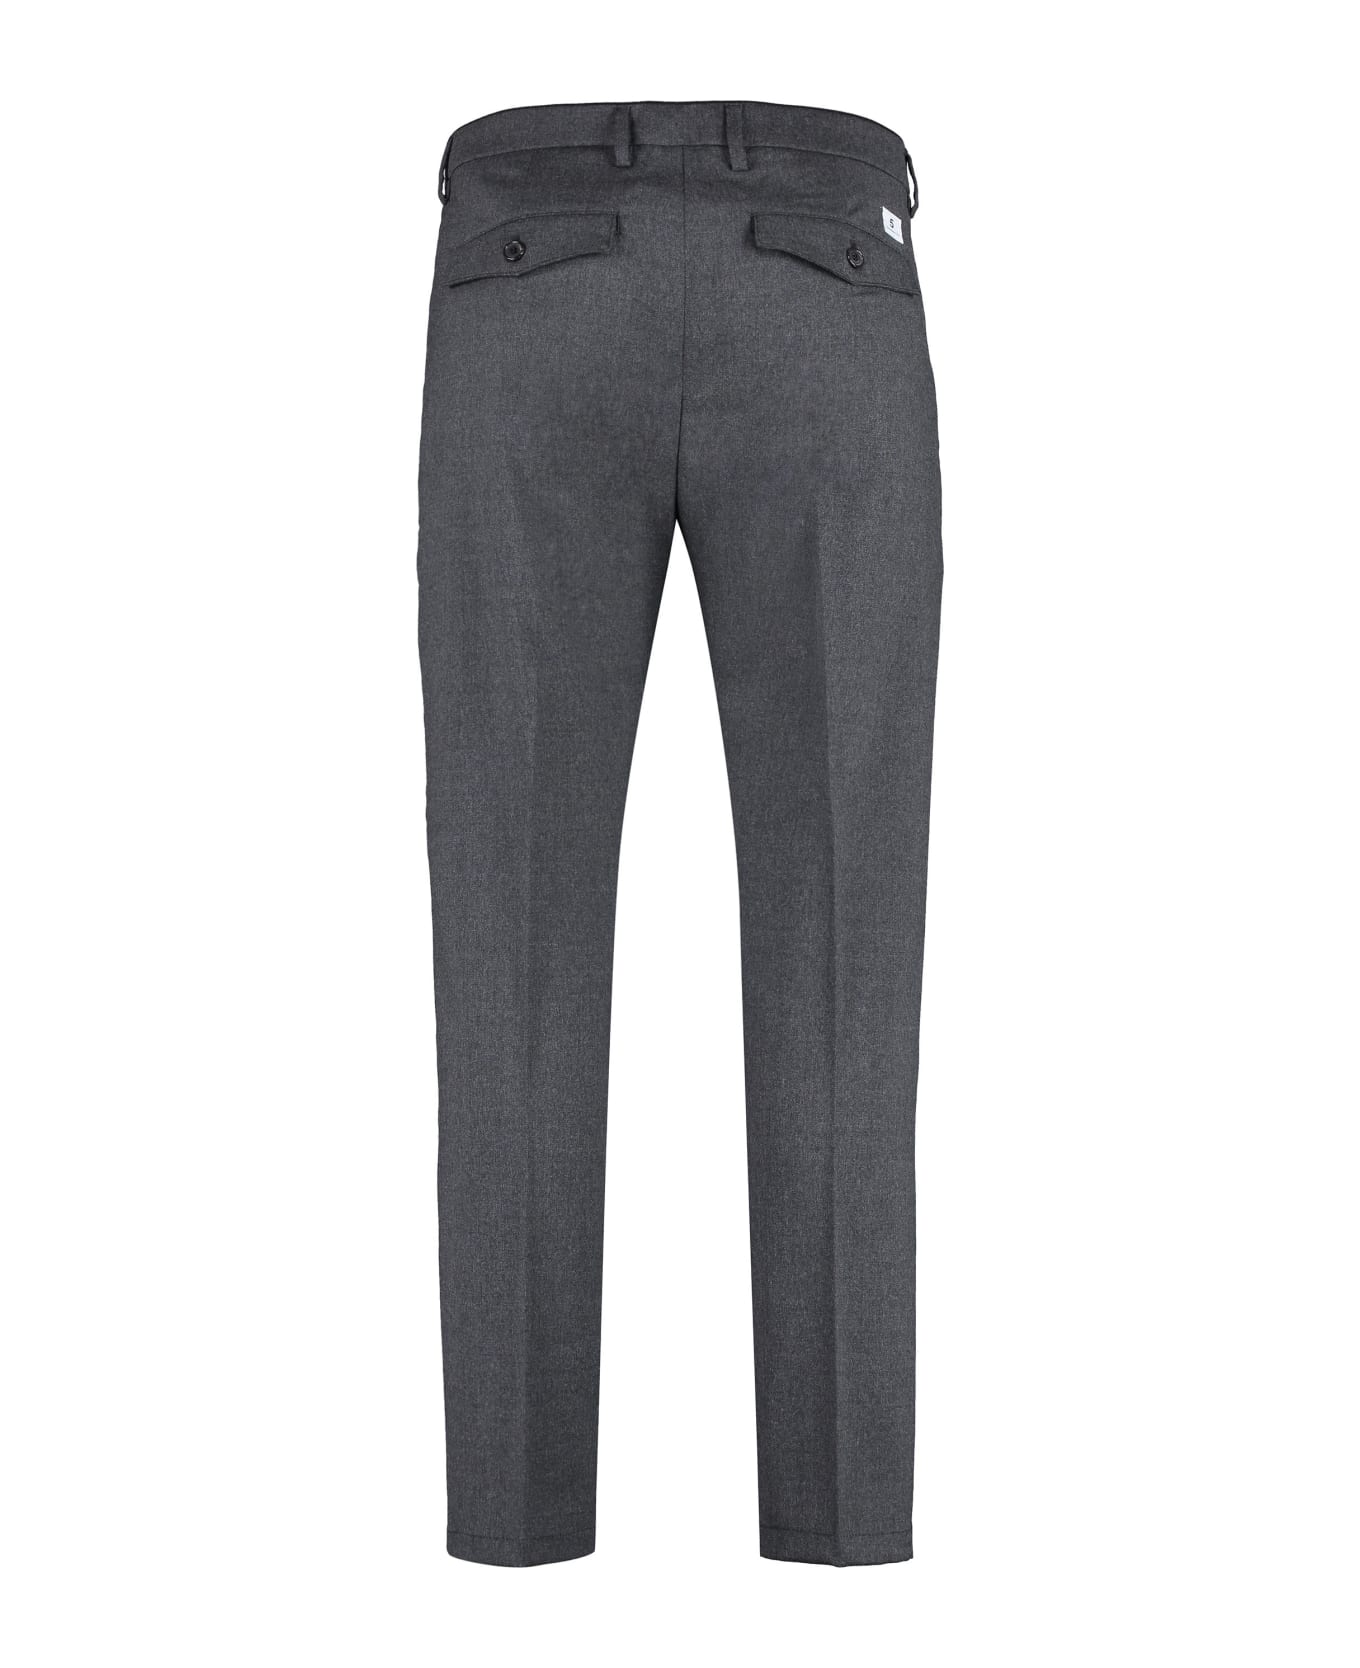 Department Five Prince Wool Blend Trousers - grey